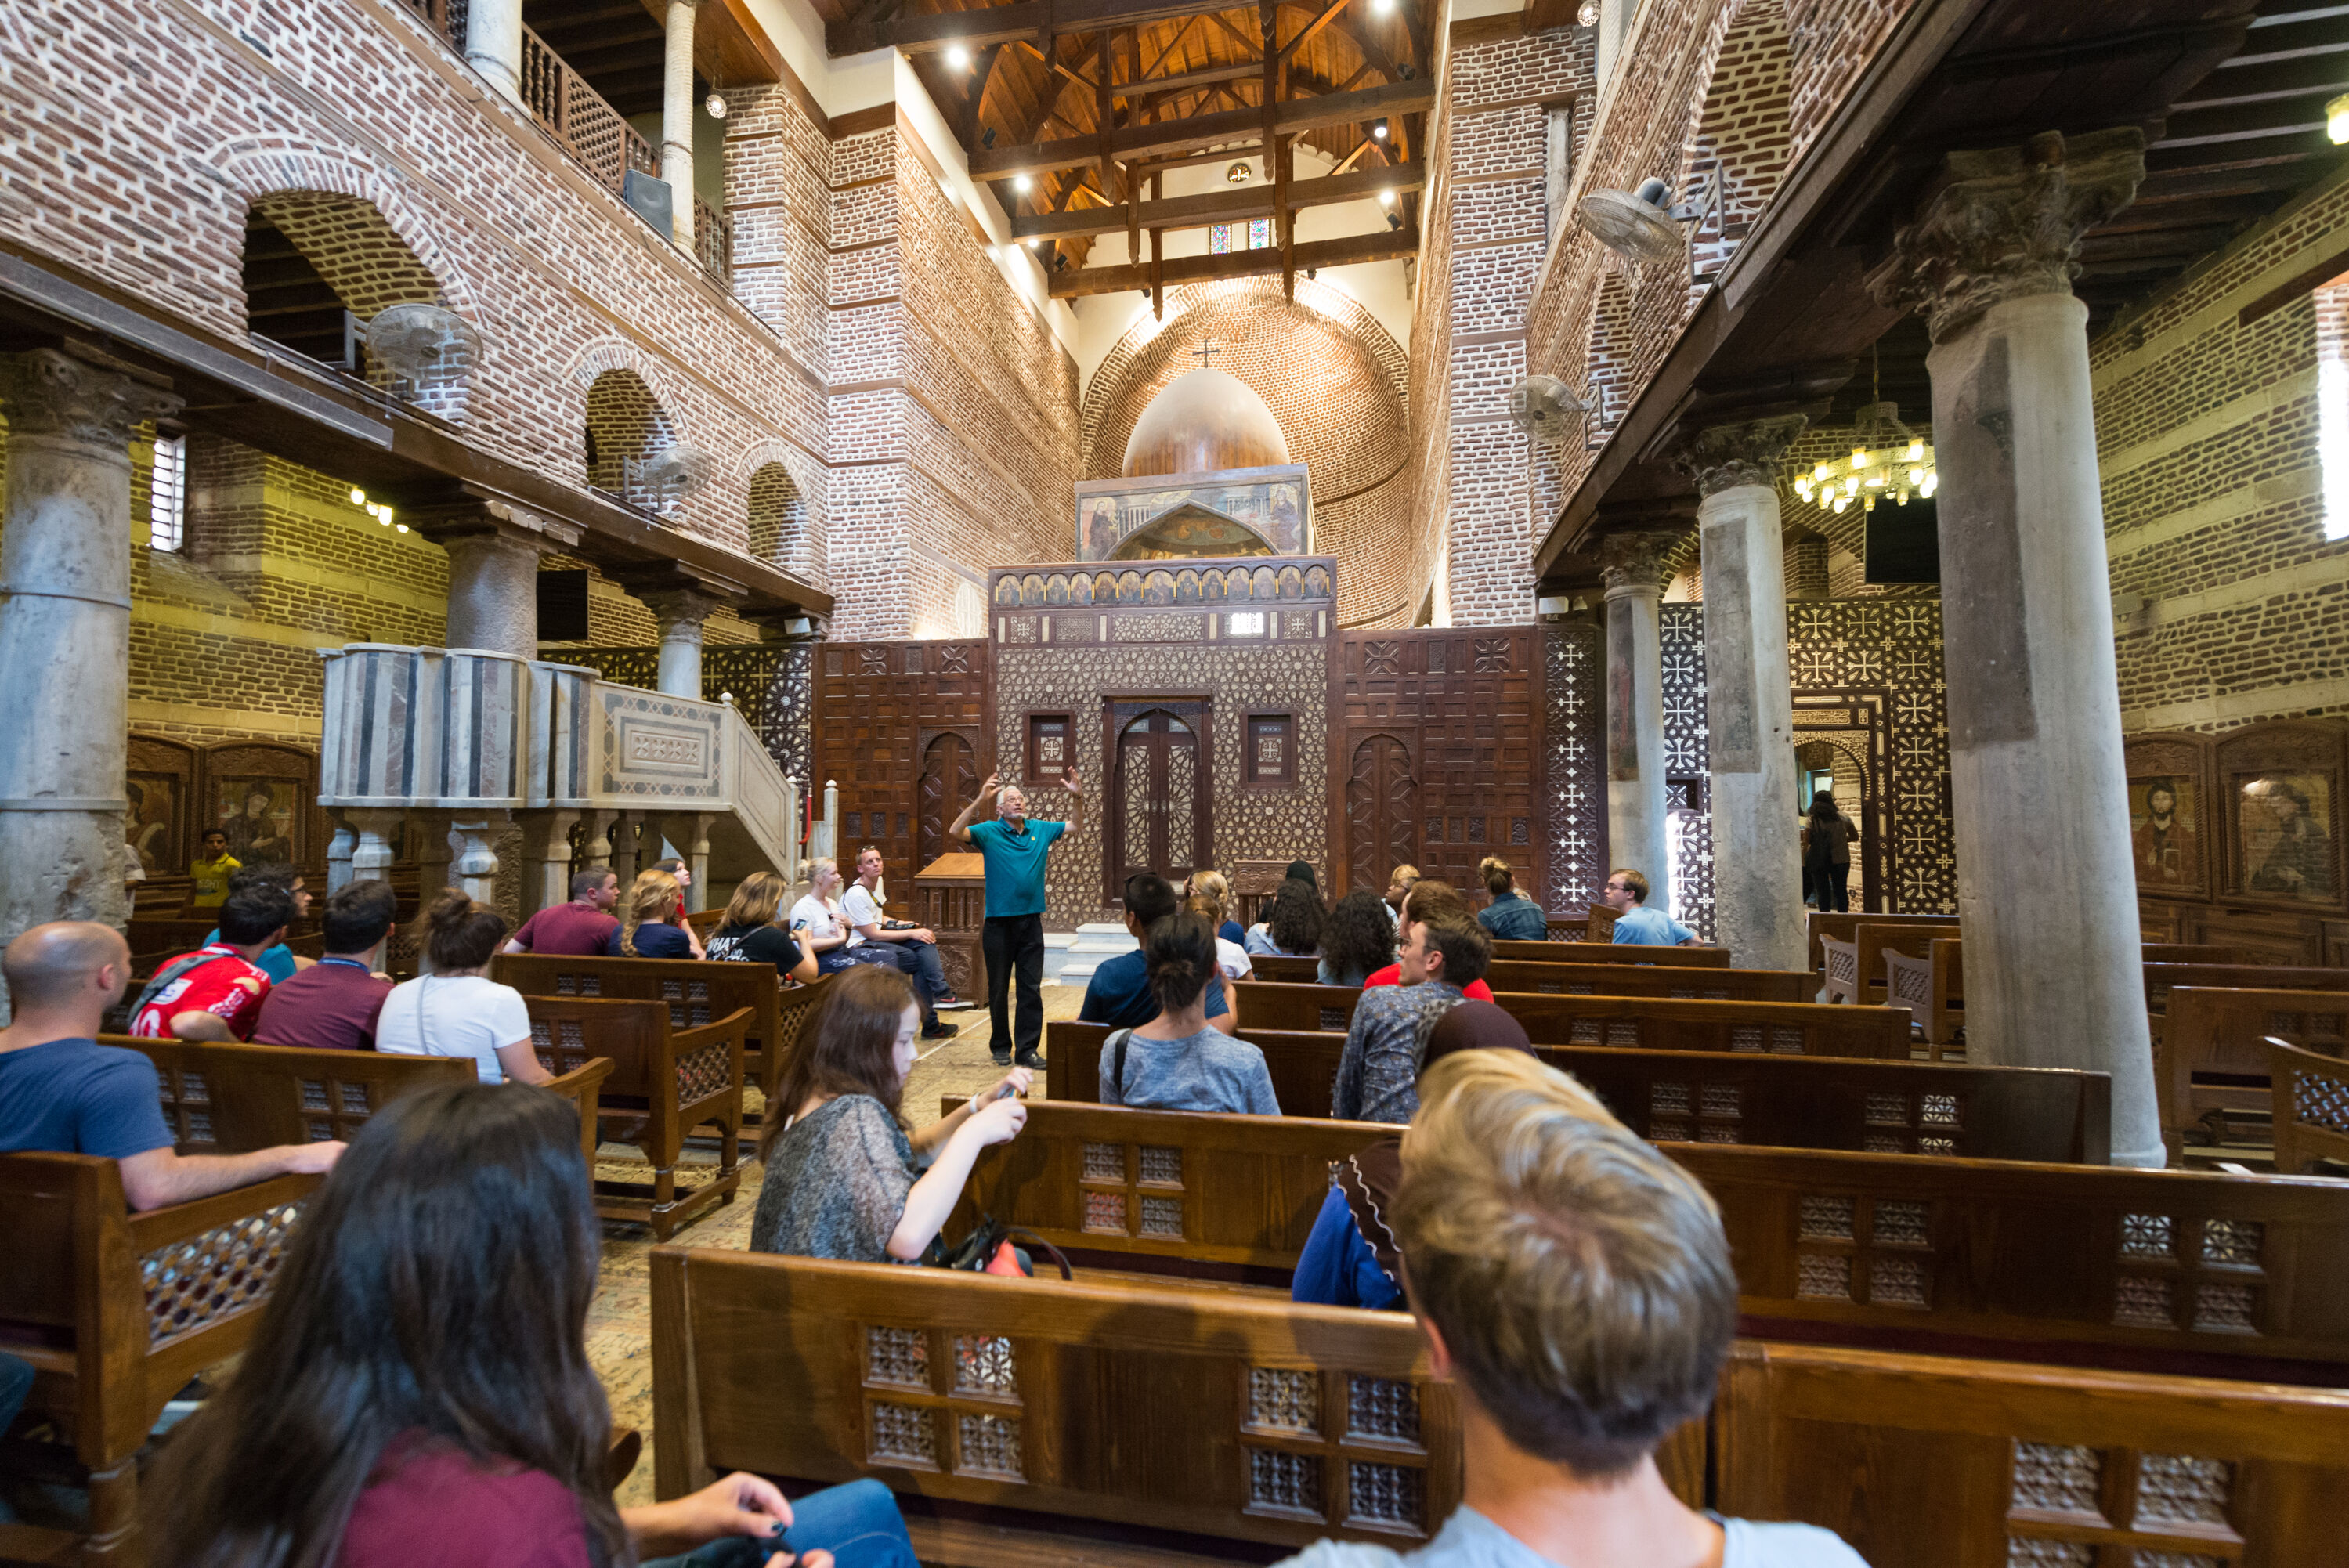 A group of international students sitting inside a church listening to a guide explaining